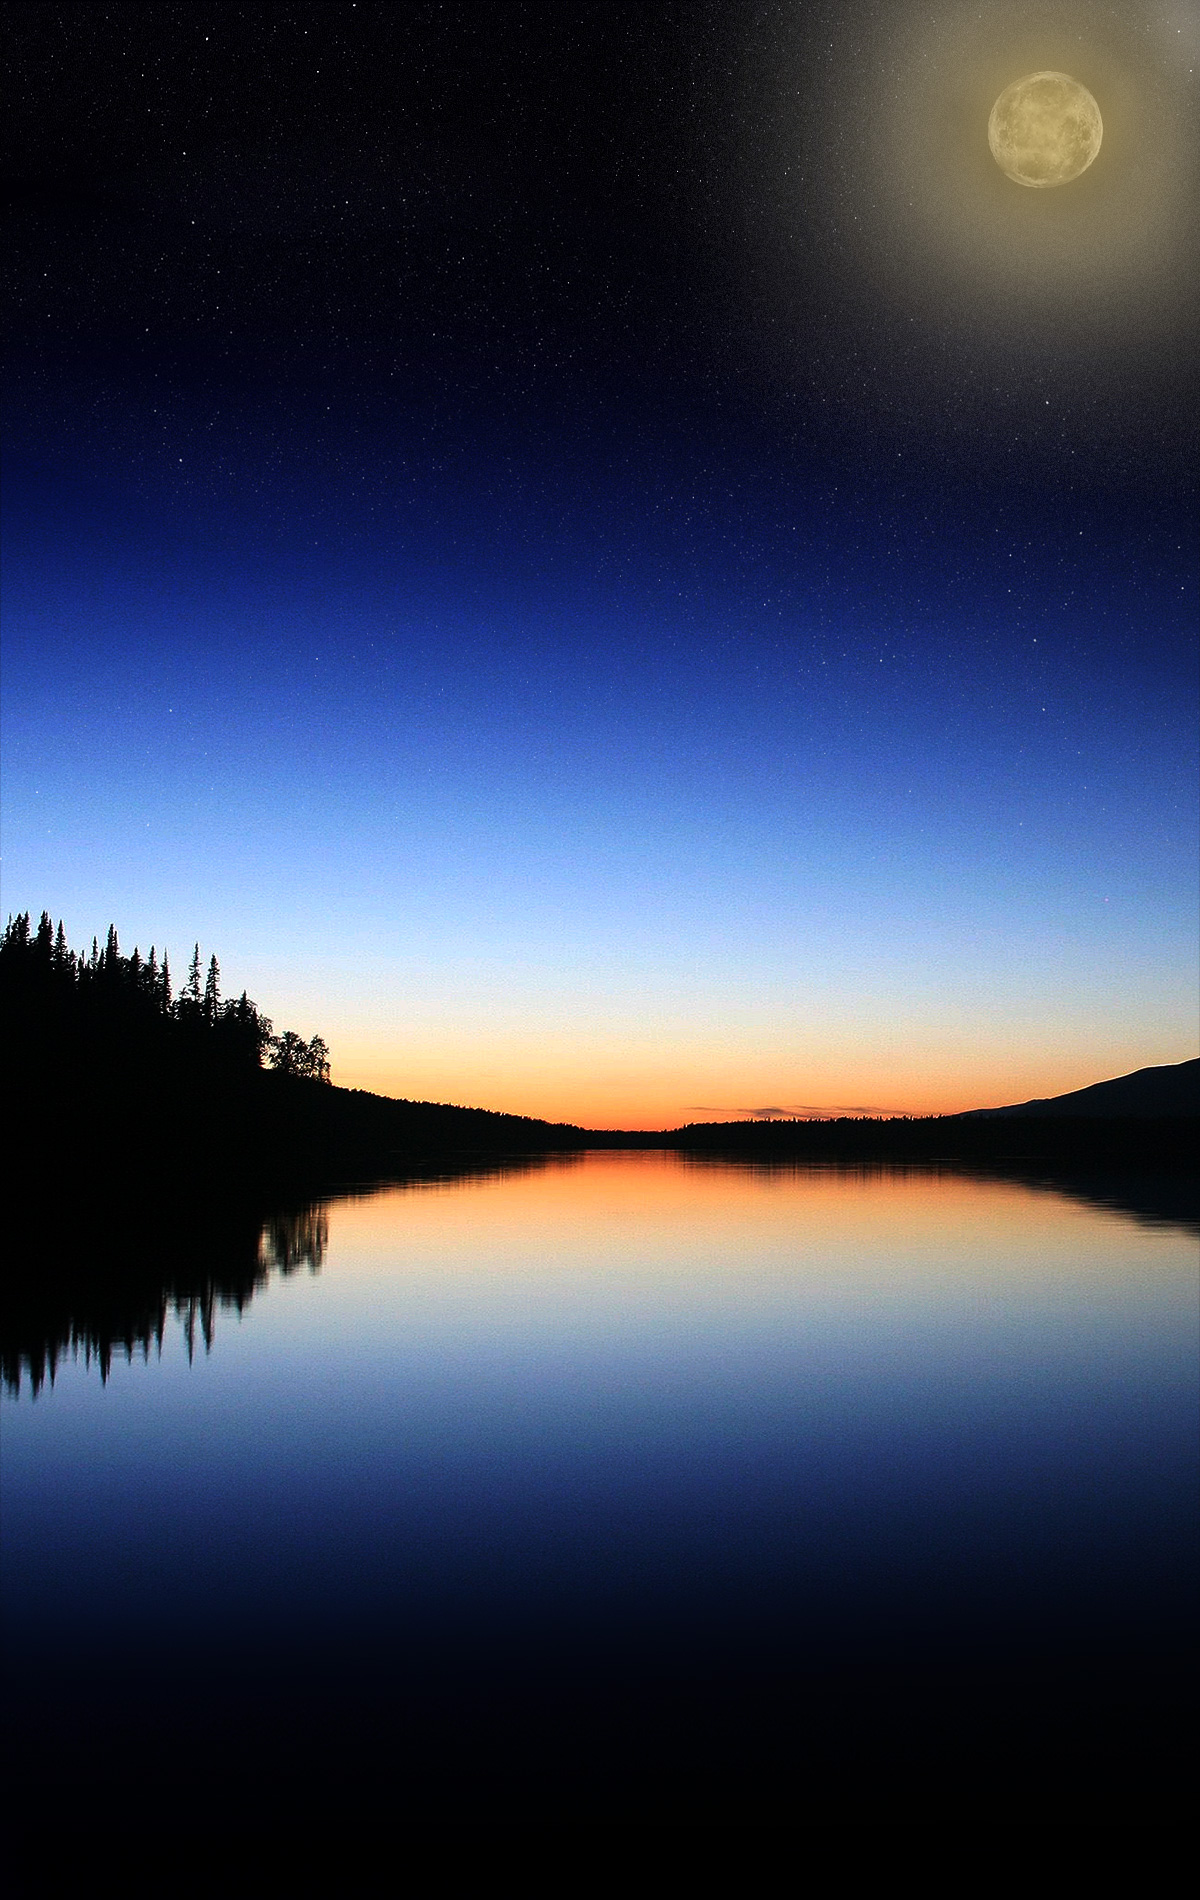 Peaceful Lake With Glowing Moon And Stars Vertical Monitor Image